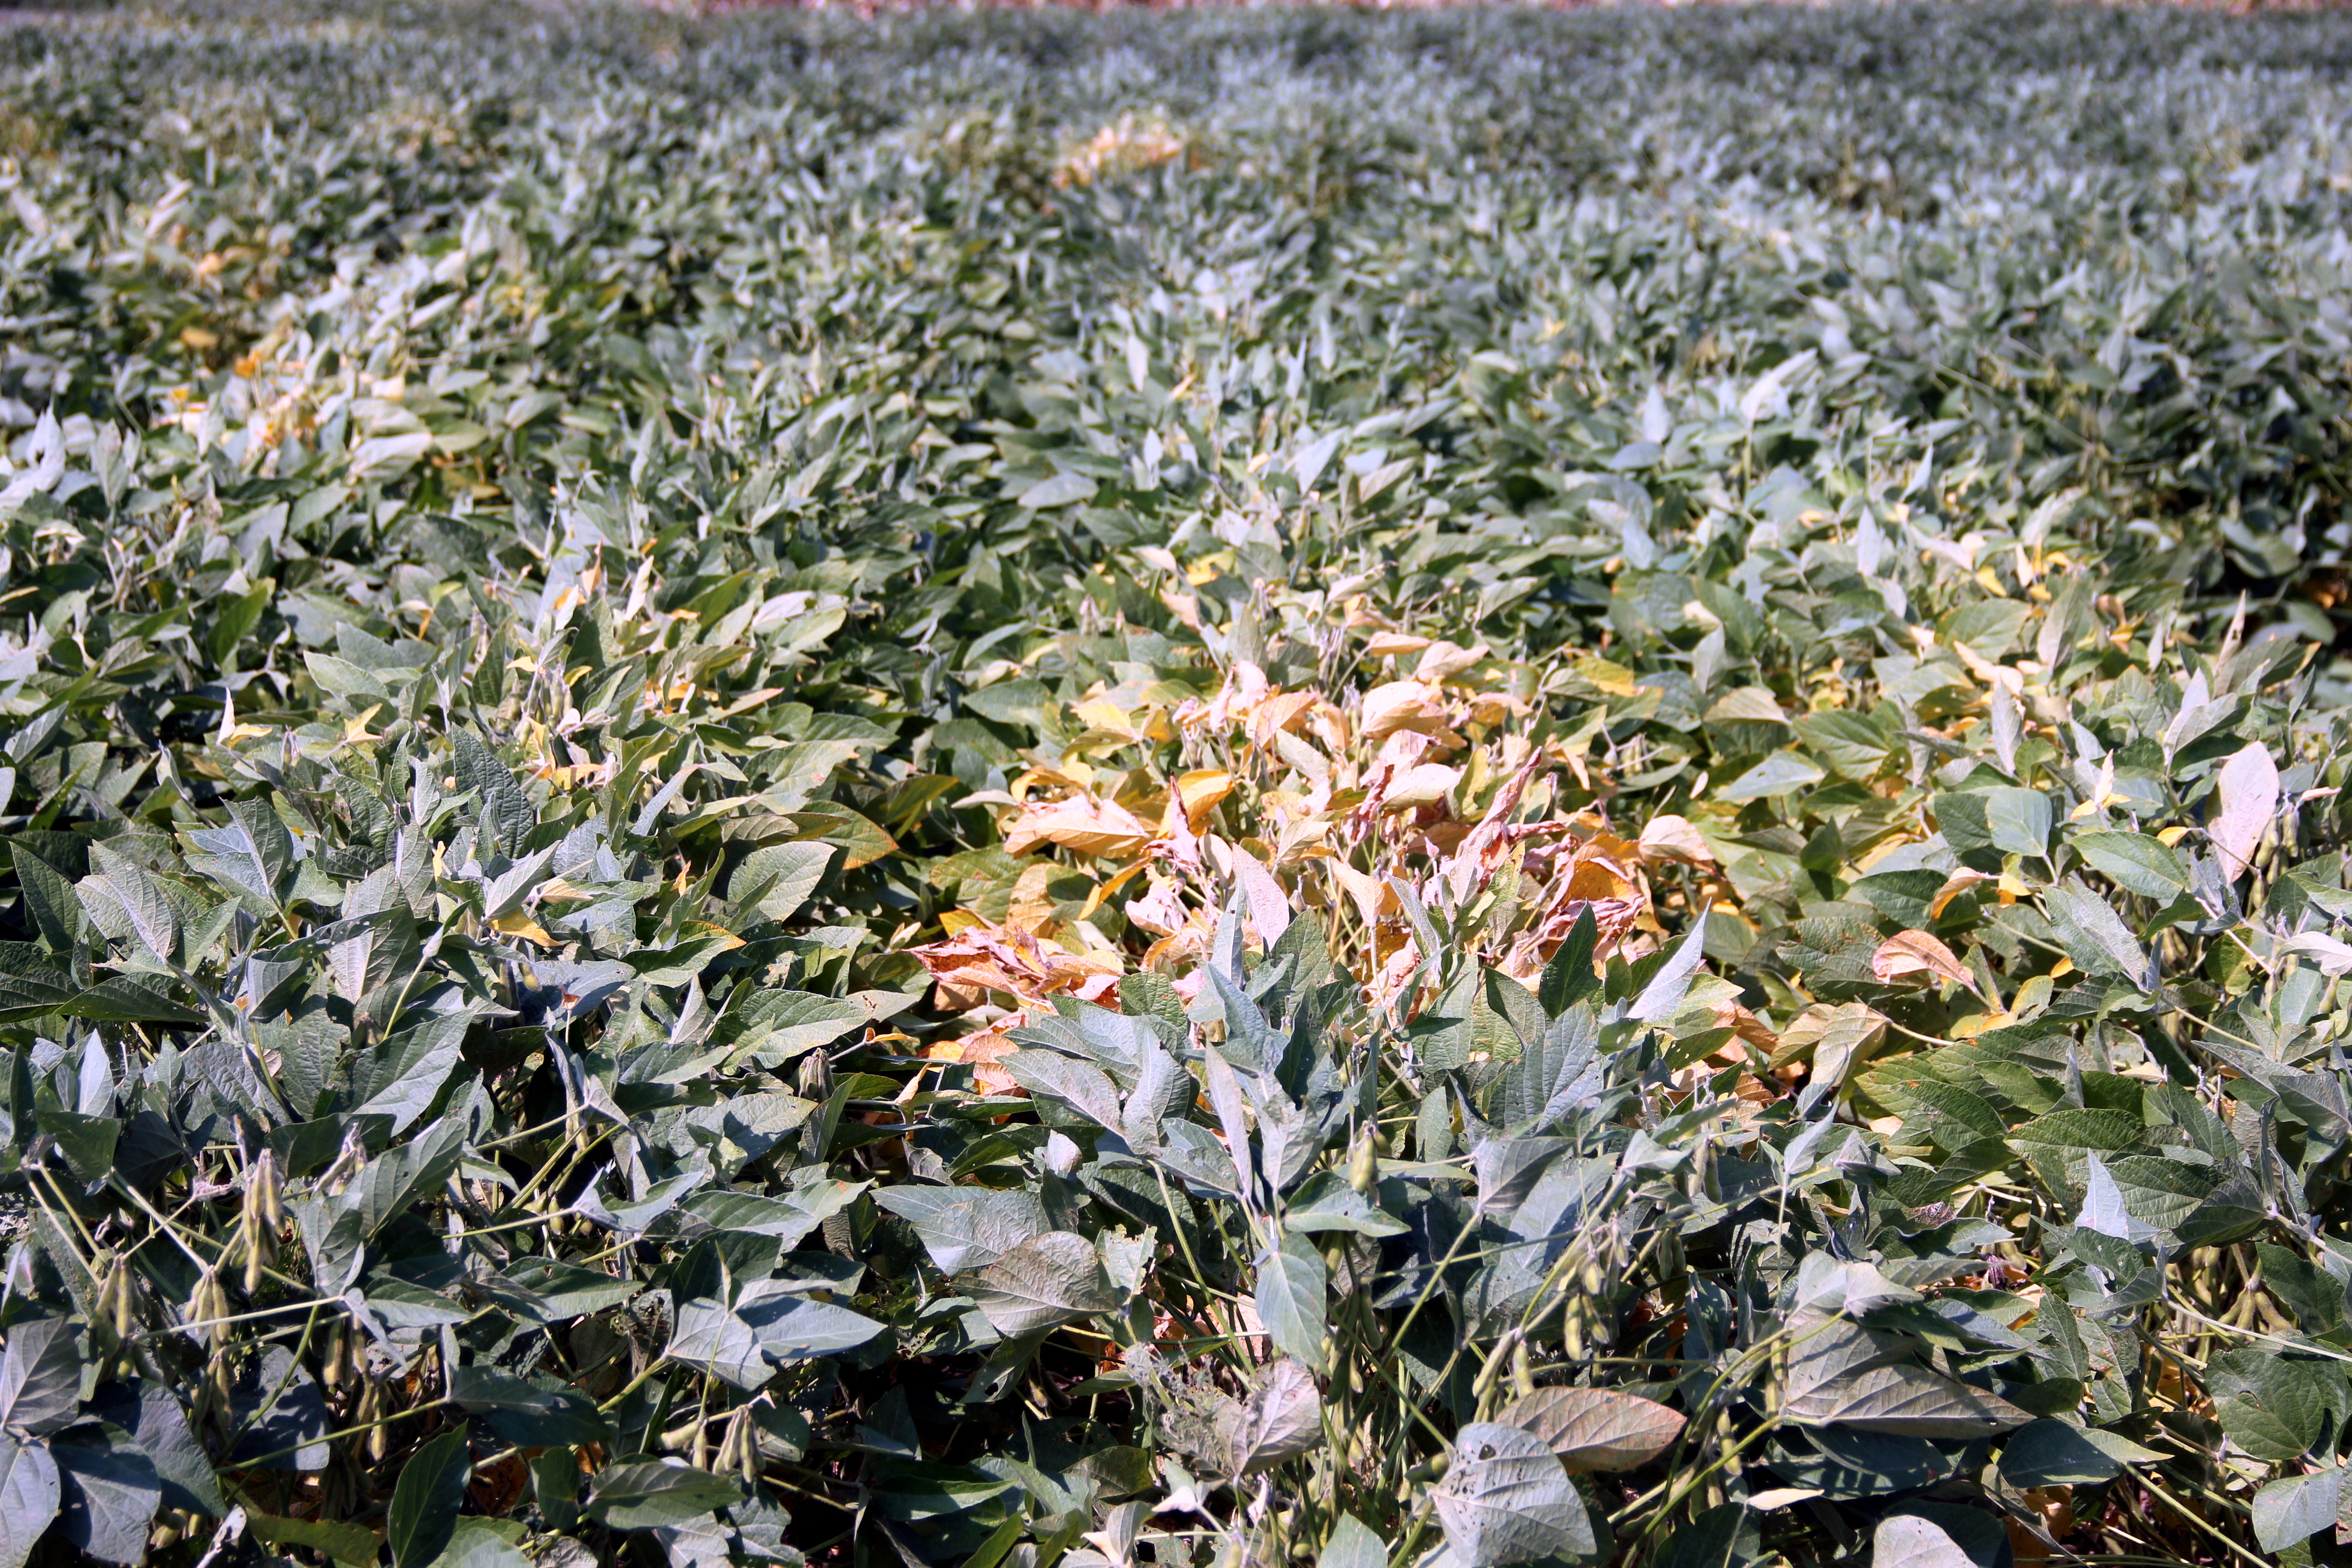 Plants with soybean dwarf within a field.